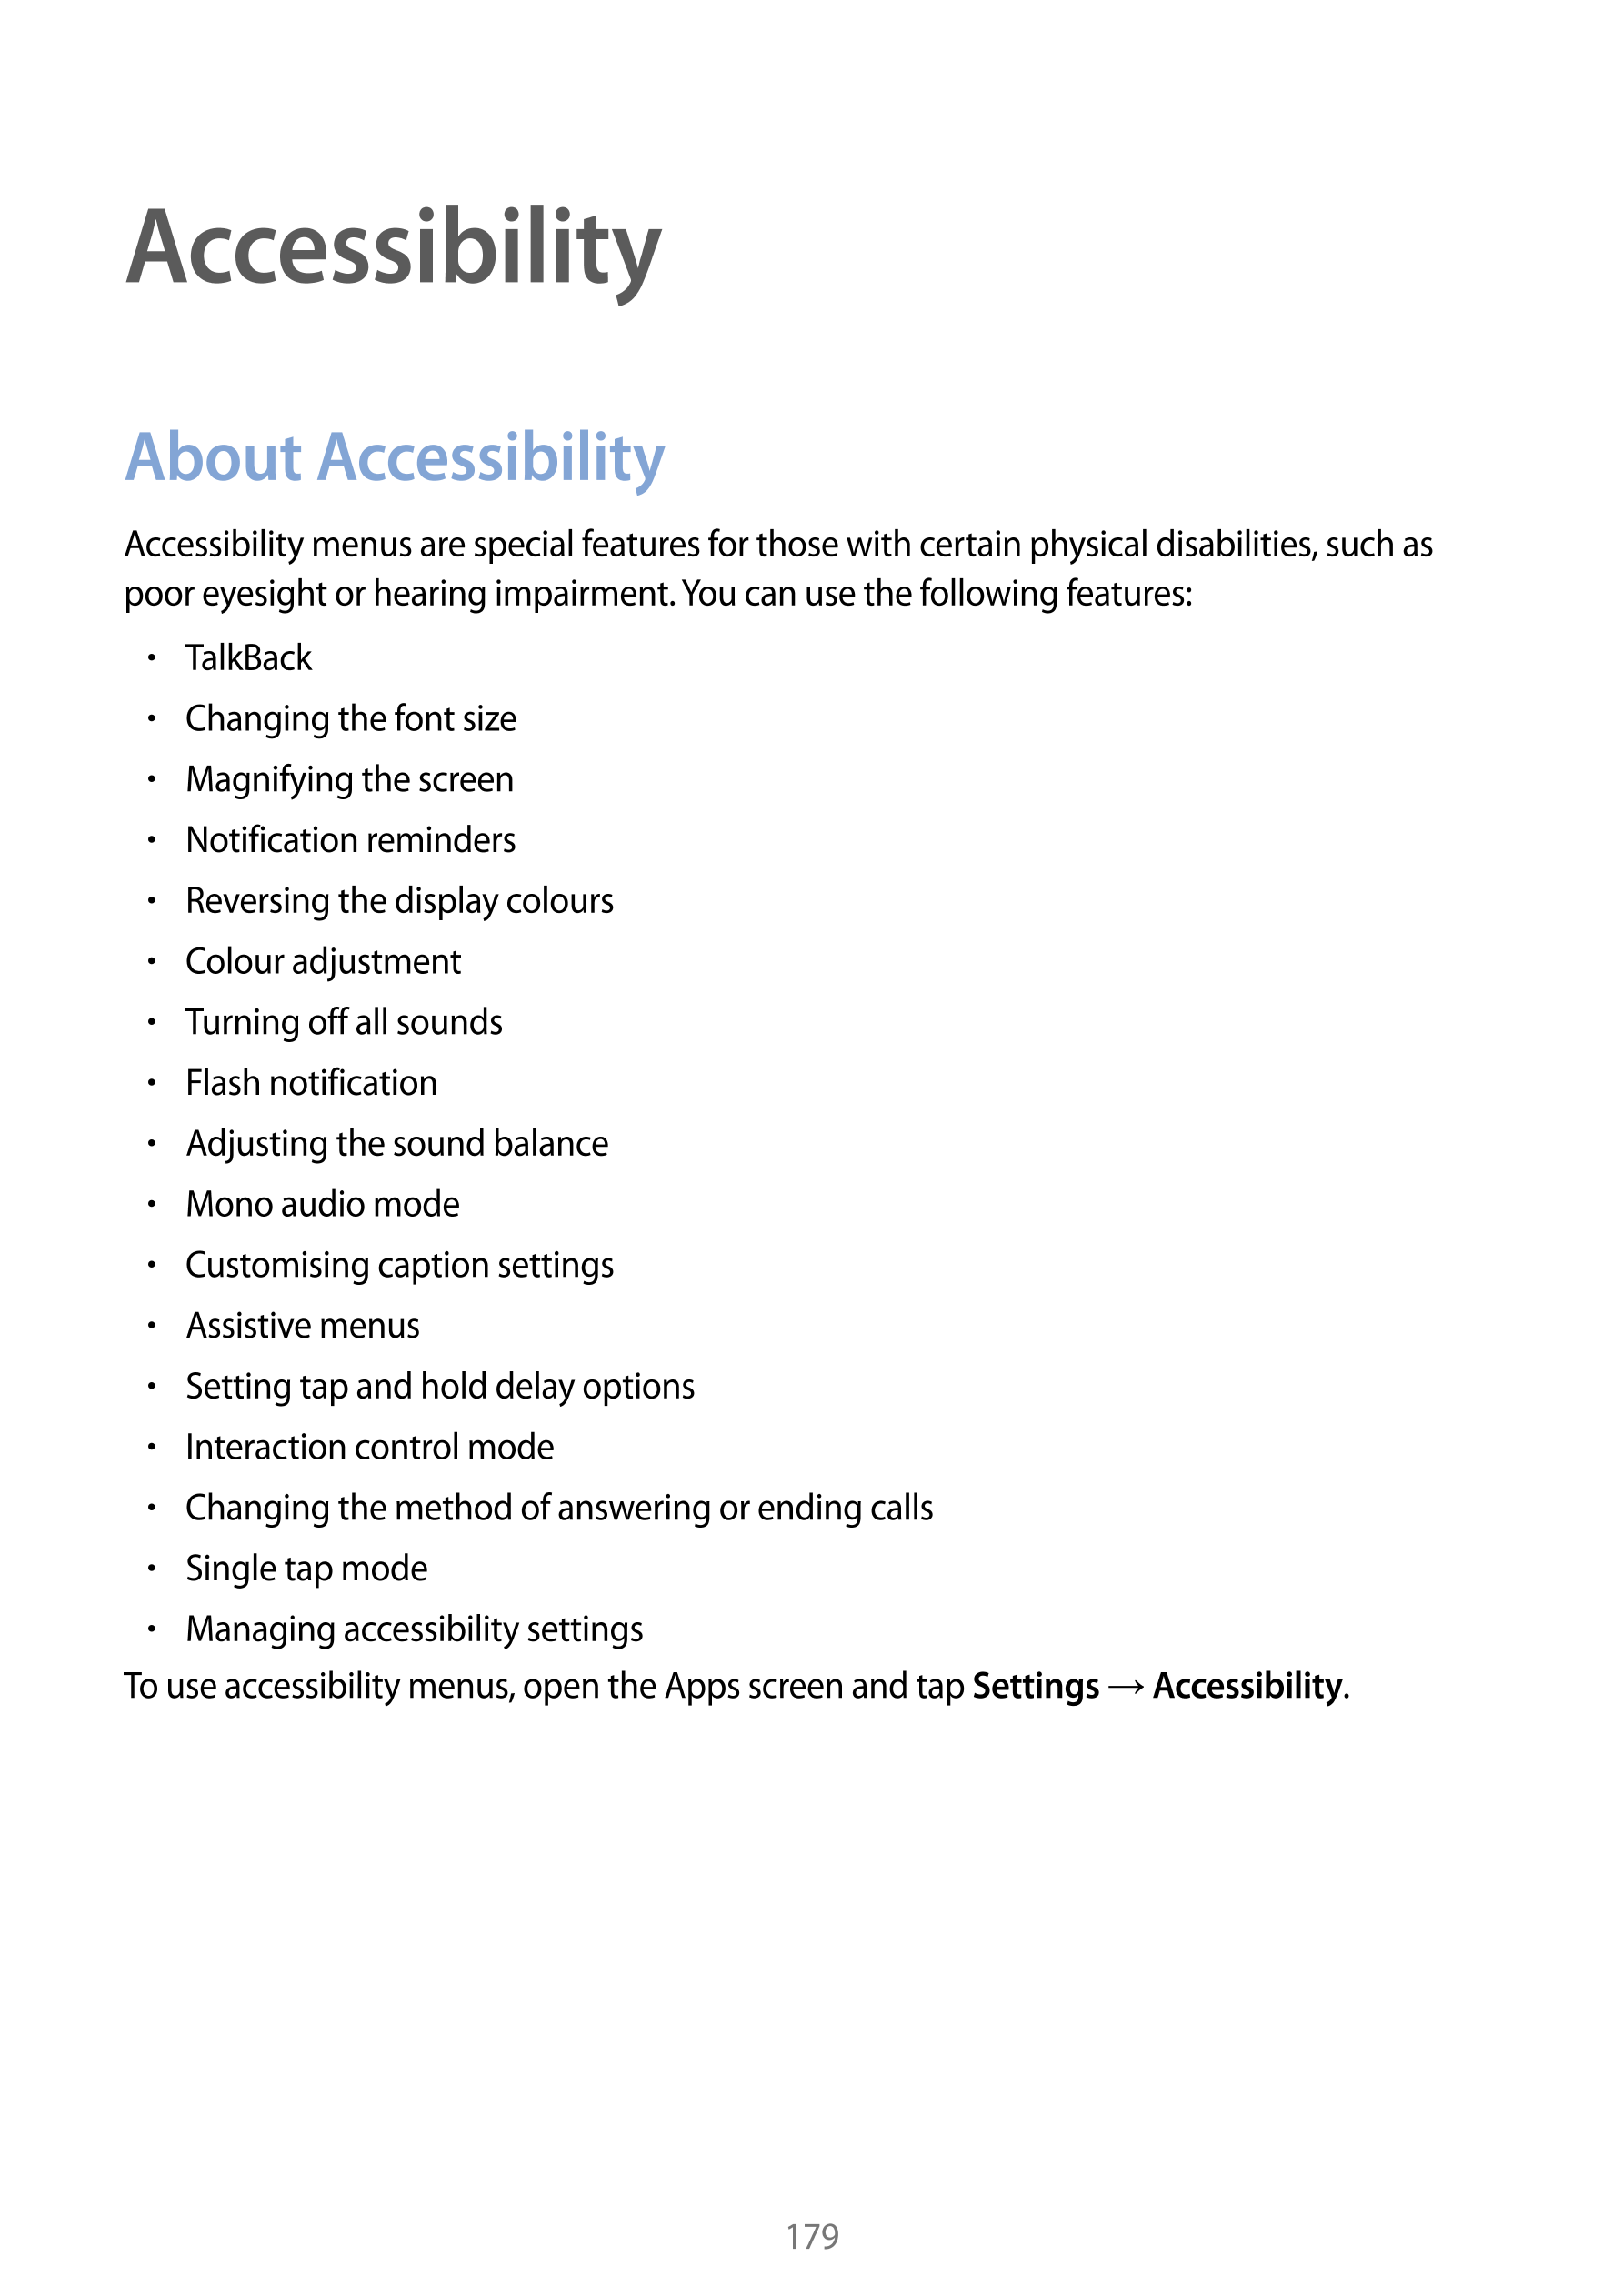 Accessibility
About Accessibility
Accessibility menus are special features for those with certain physical disabilities, such as